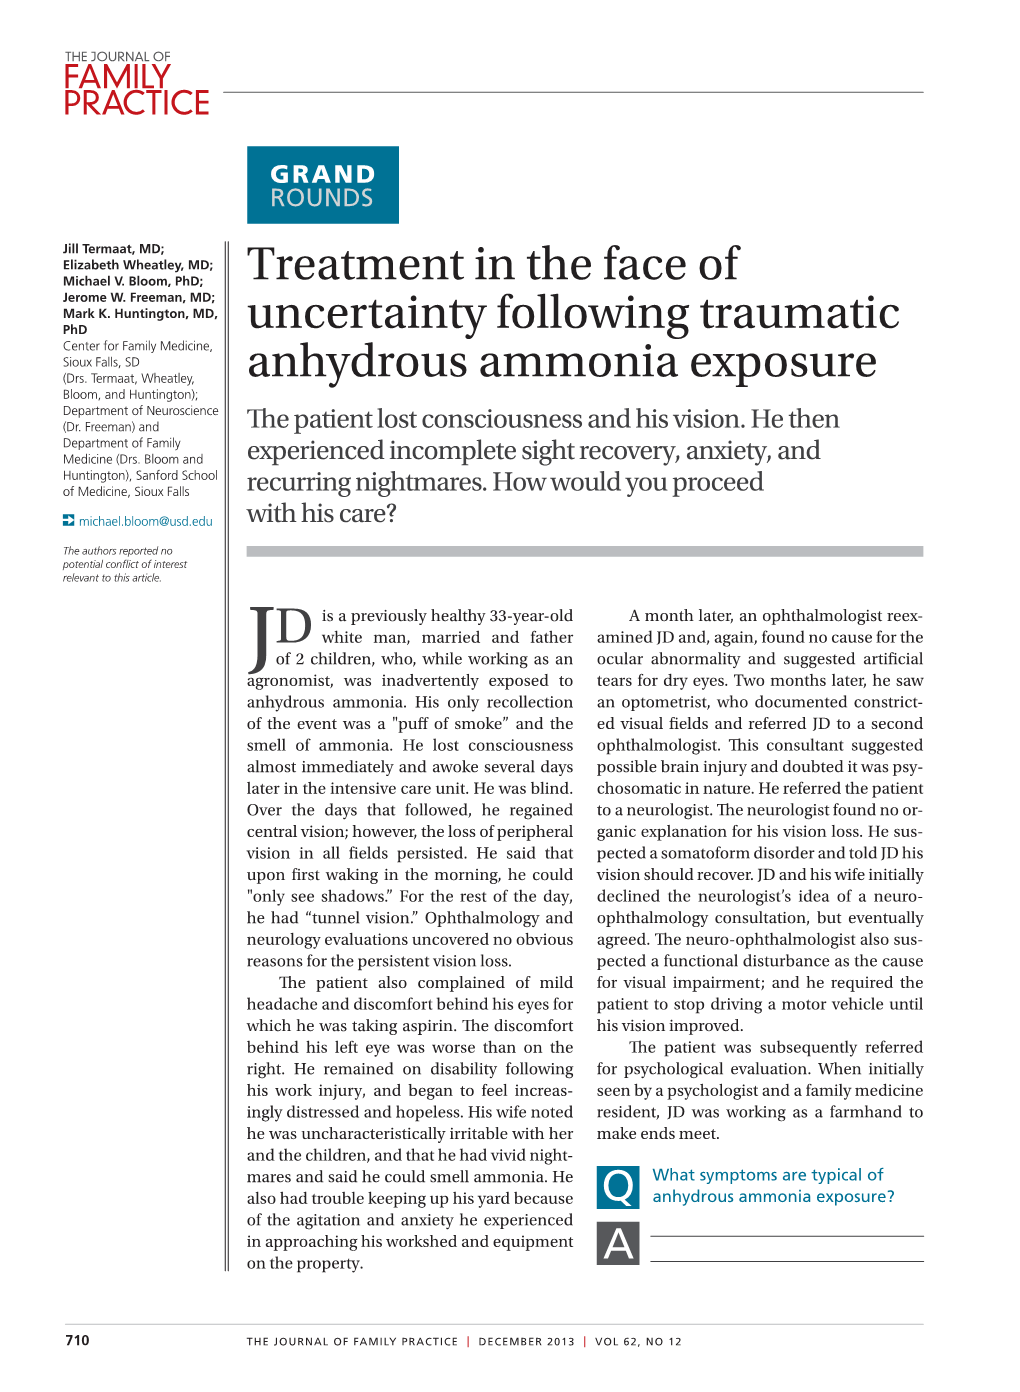 Treatment in the Face of Uncertainty Following Traumatic Anhydrous